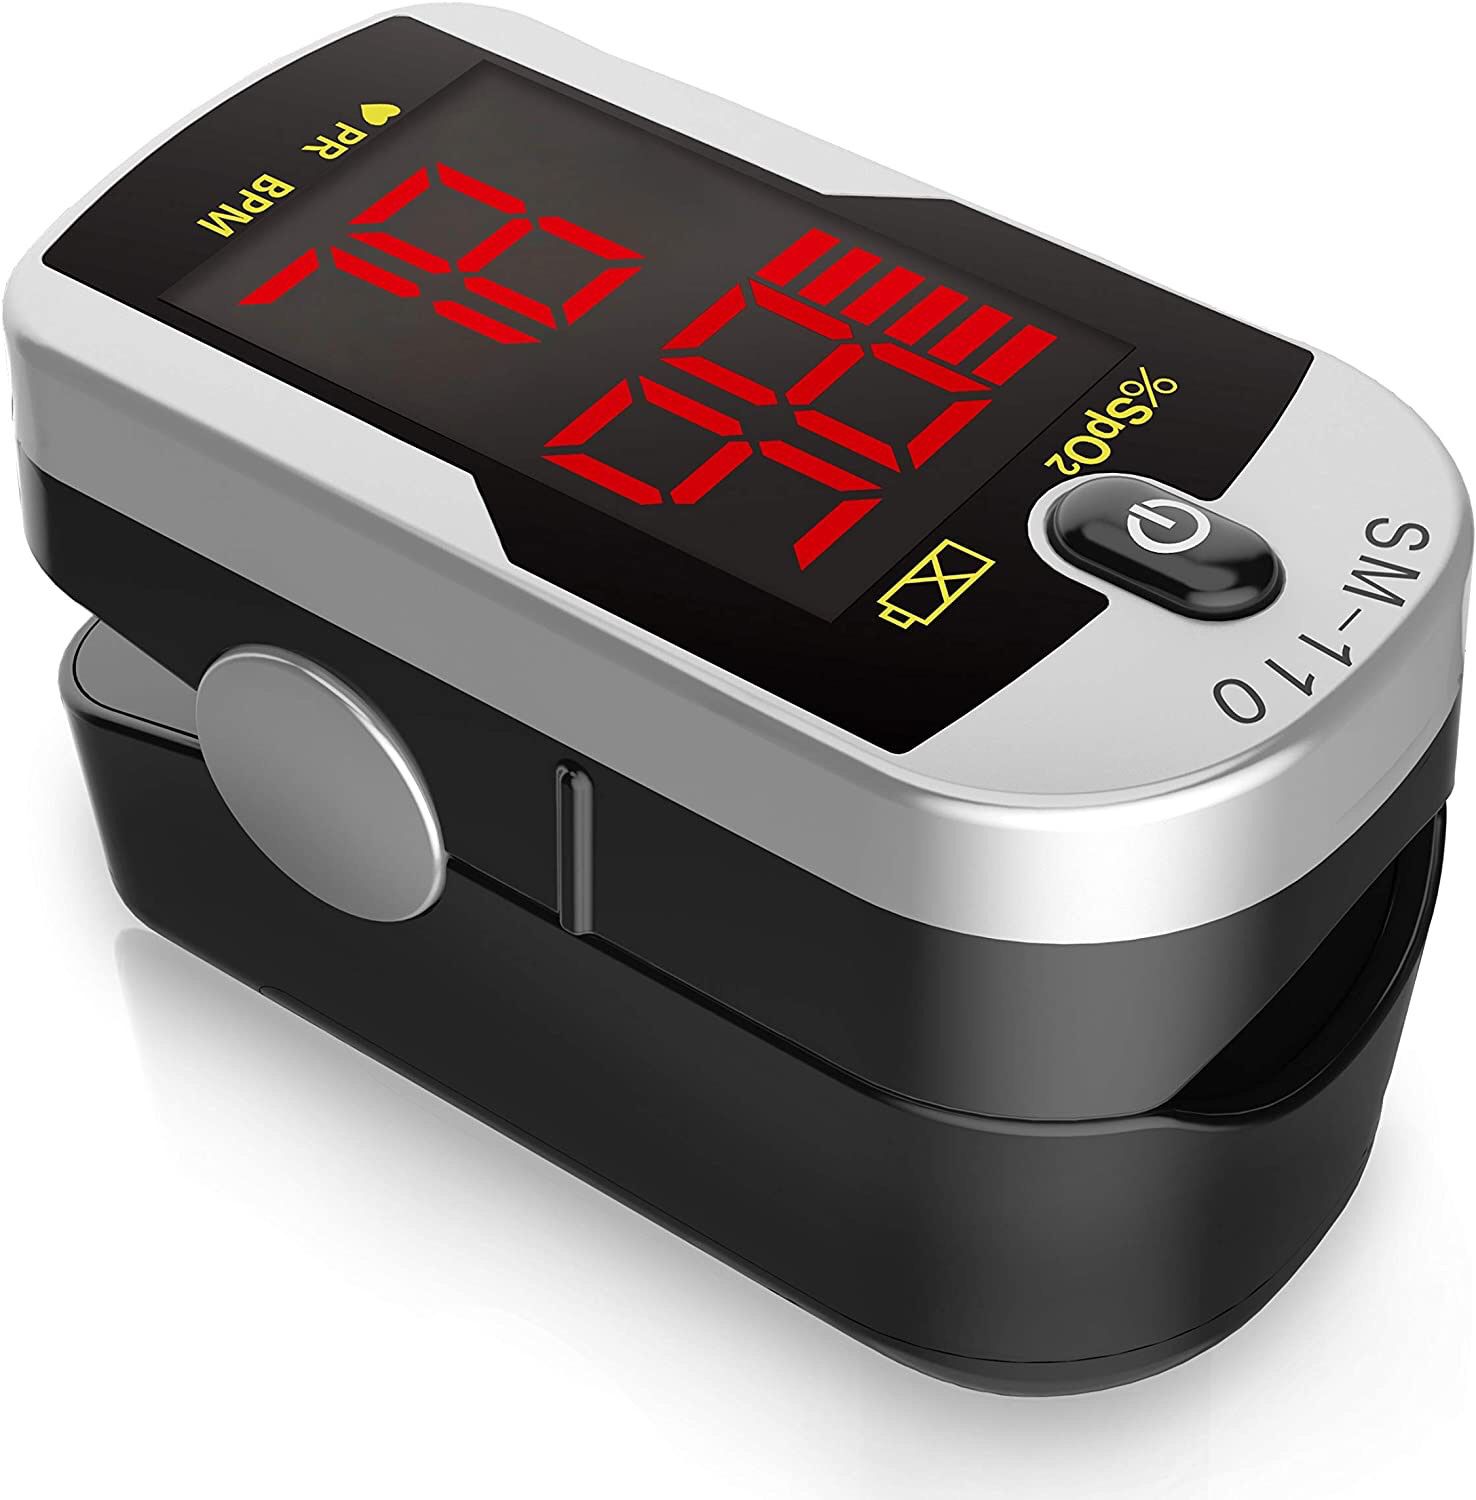 Deluxe SM-110 Two Way Display Finger Pulse Oximeter with Carry Case and Neck/Wrist Cord